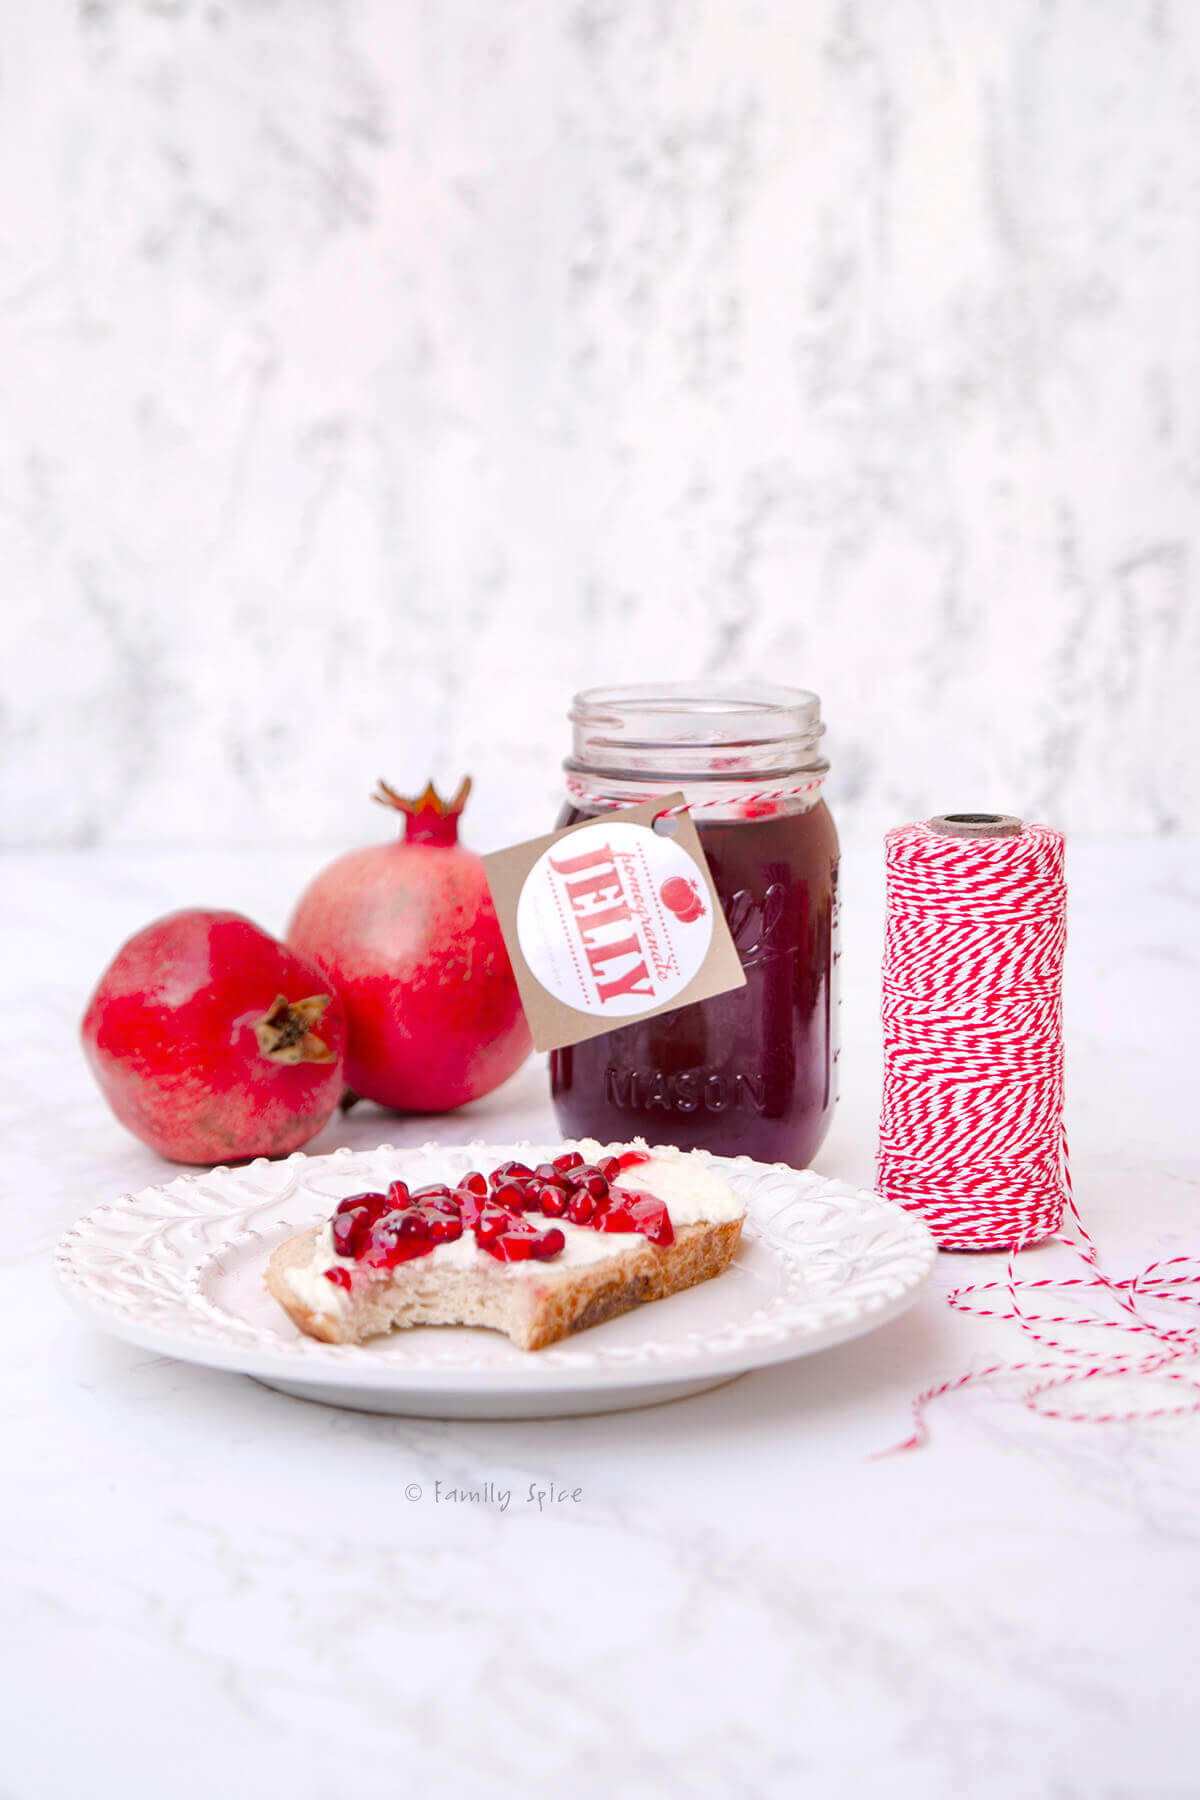 Side view of a plate with toast, cheese and pomegranate jelly and a jar of jelly and pomegranates behind it